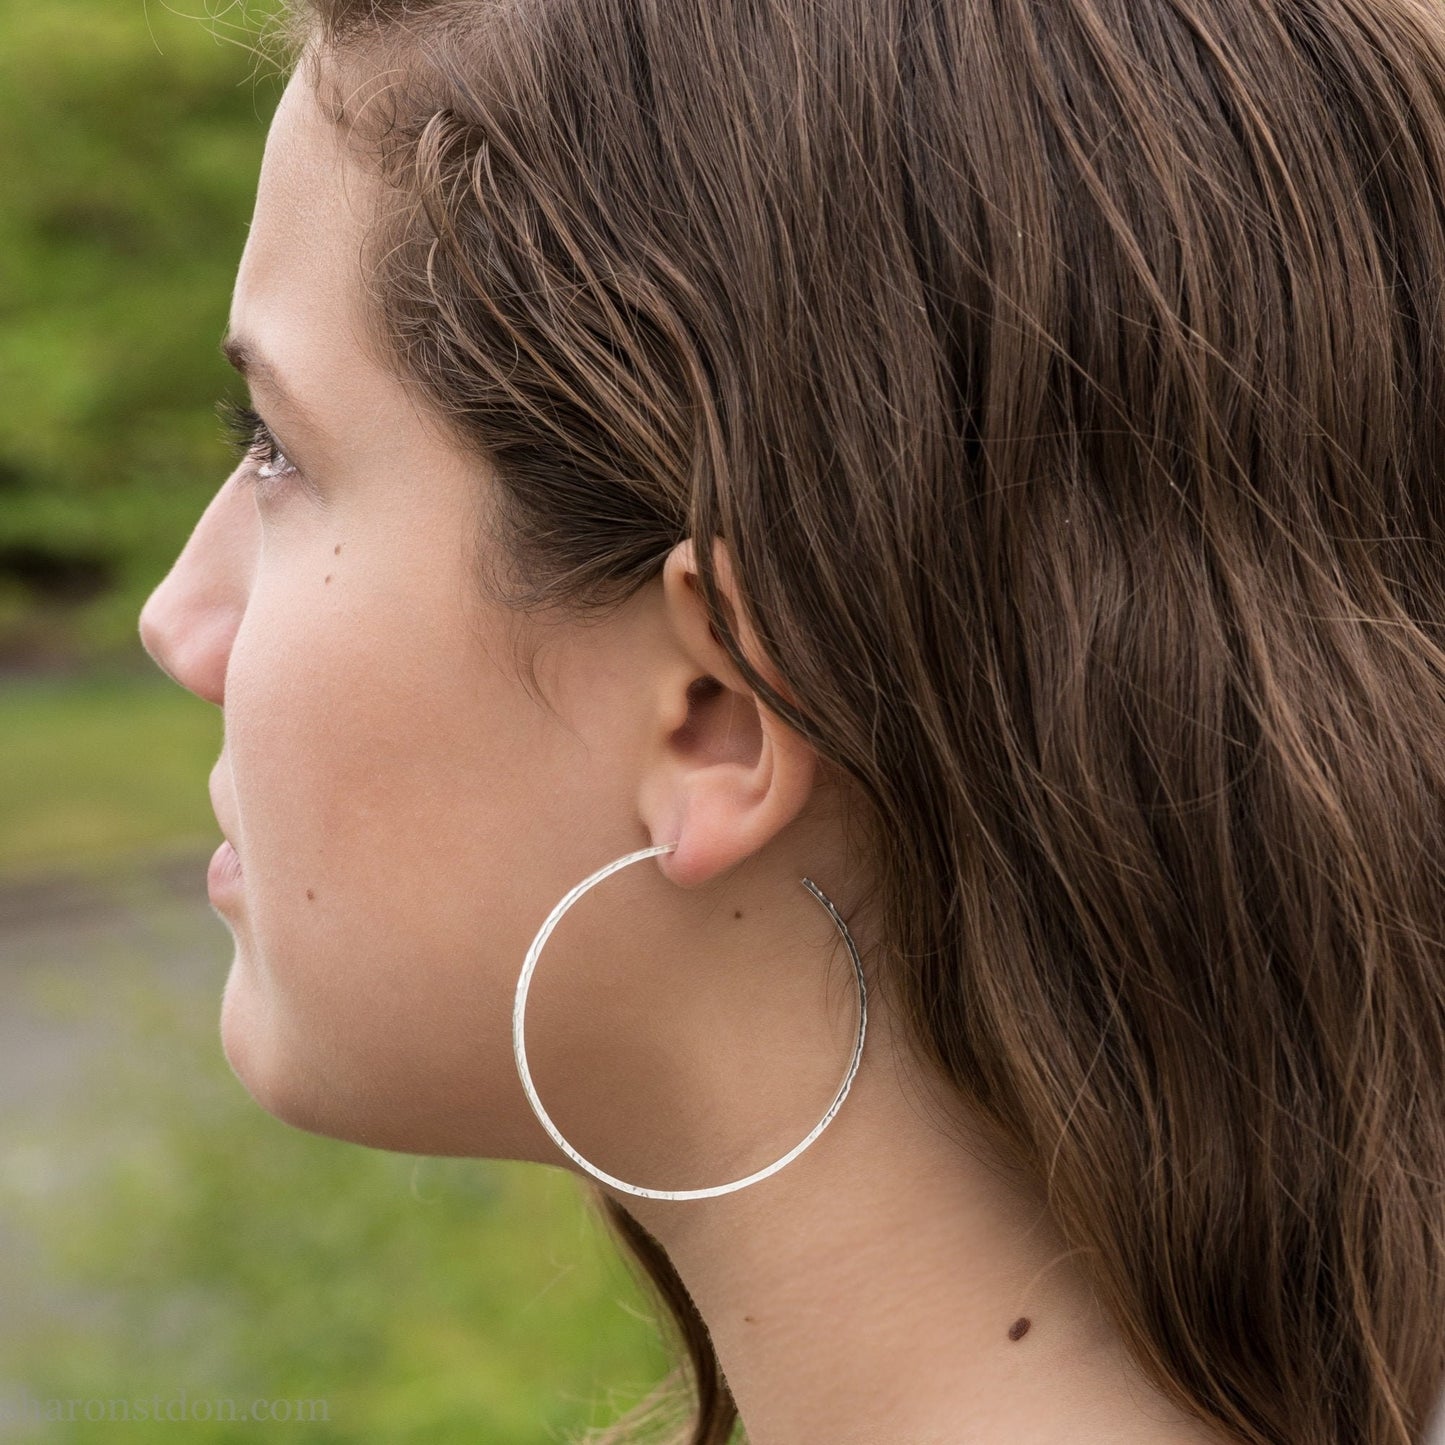 handmade 925 sterling silver hoop earrings for women. Comfortable, lightweight, daily wear earrings with a hammered, wavy texture.